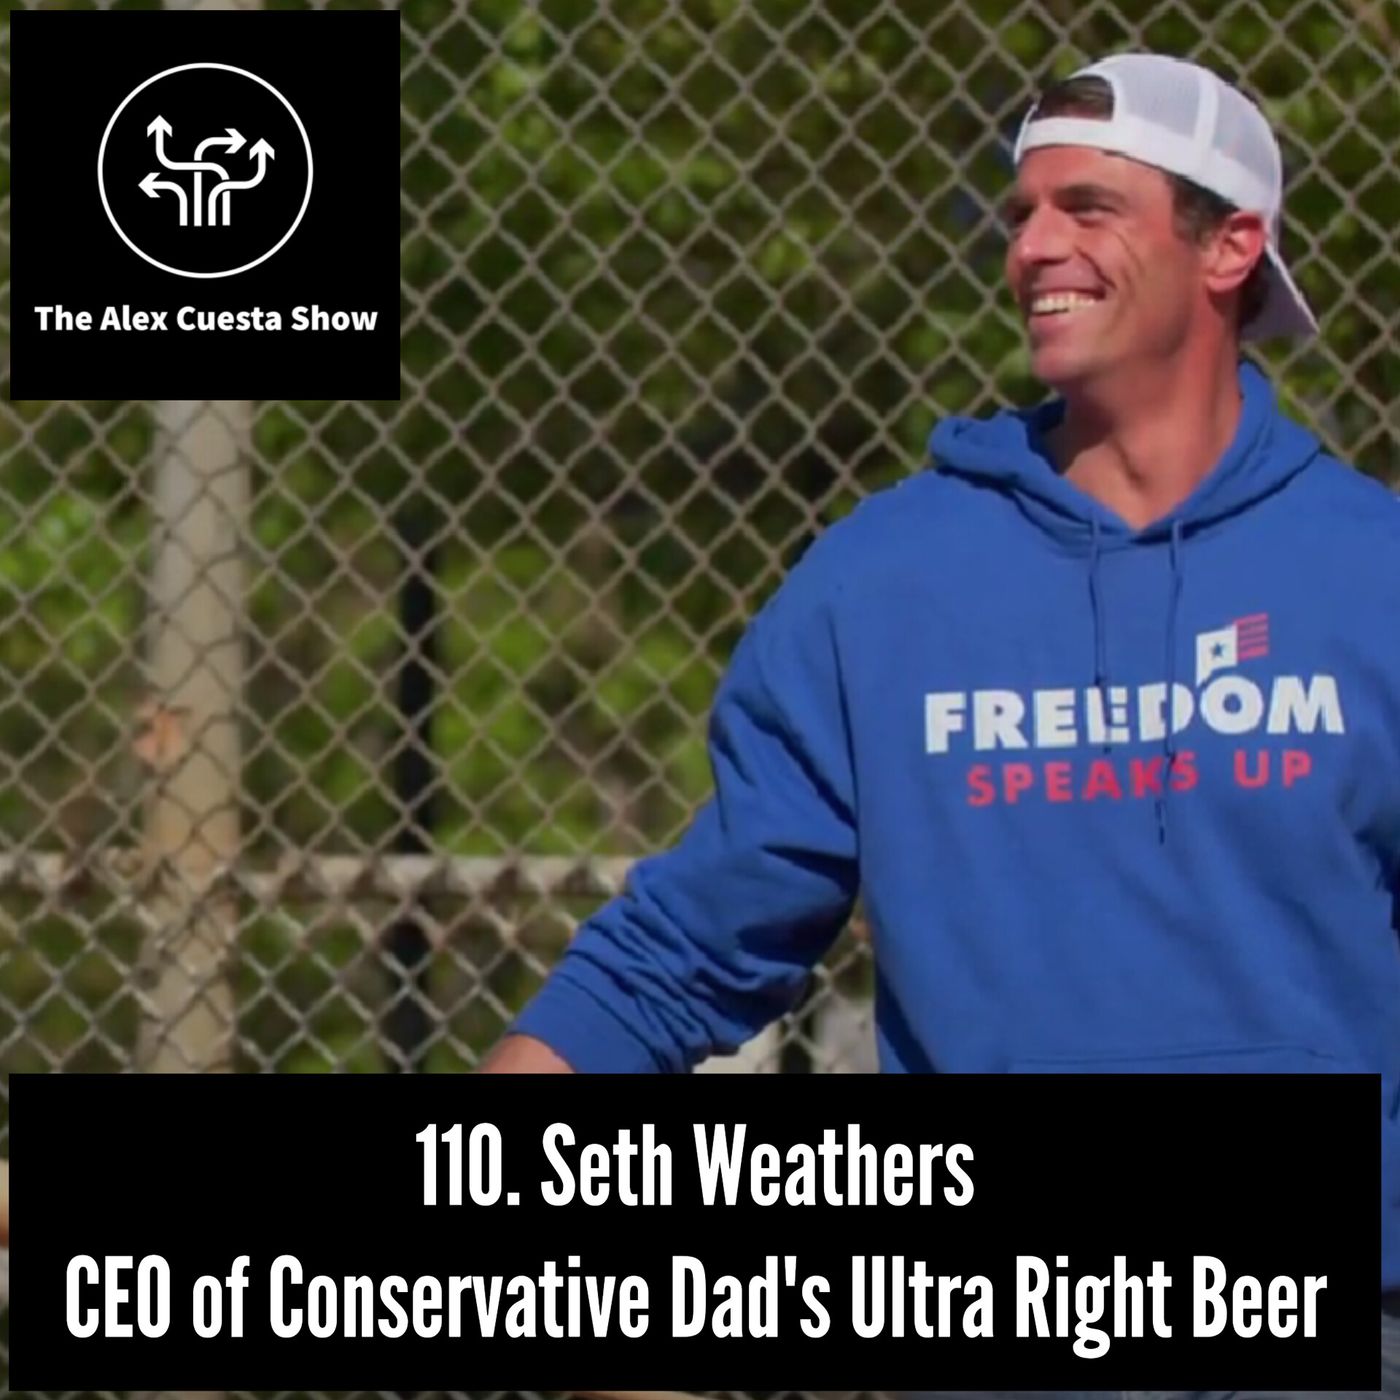 110. Seth Weathers, CEO of Conservative Dad's Ultra Right Beer